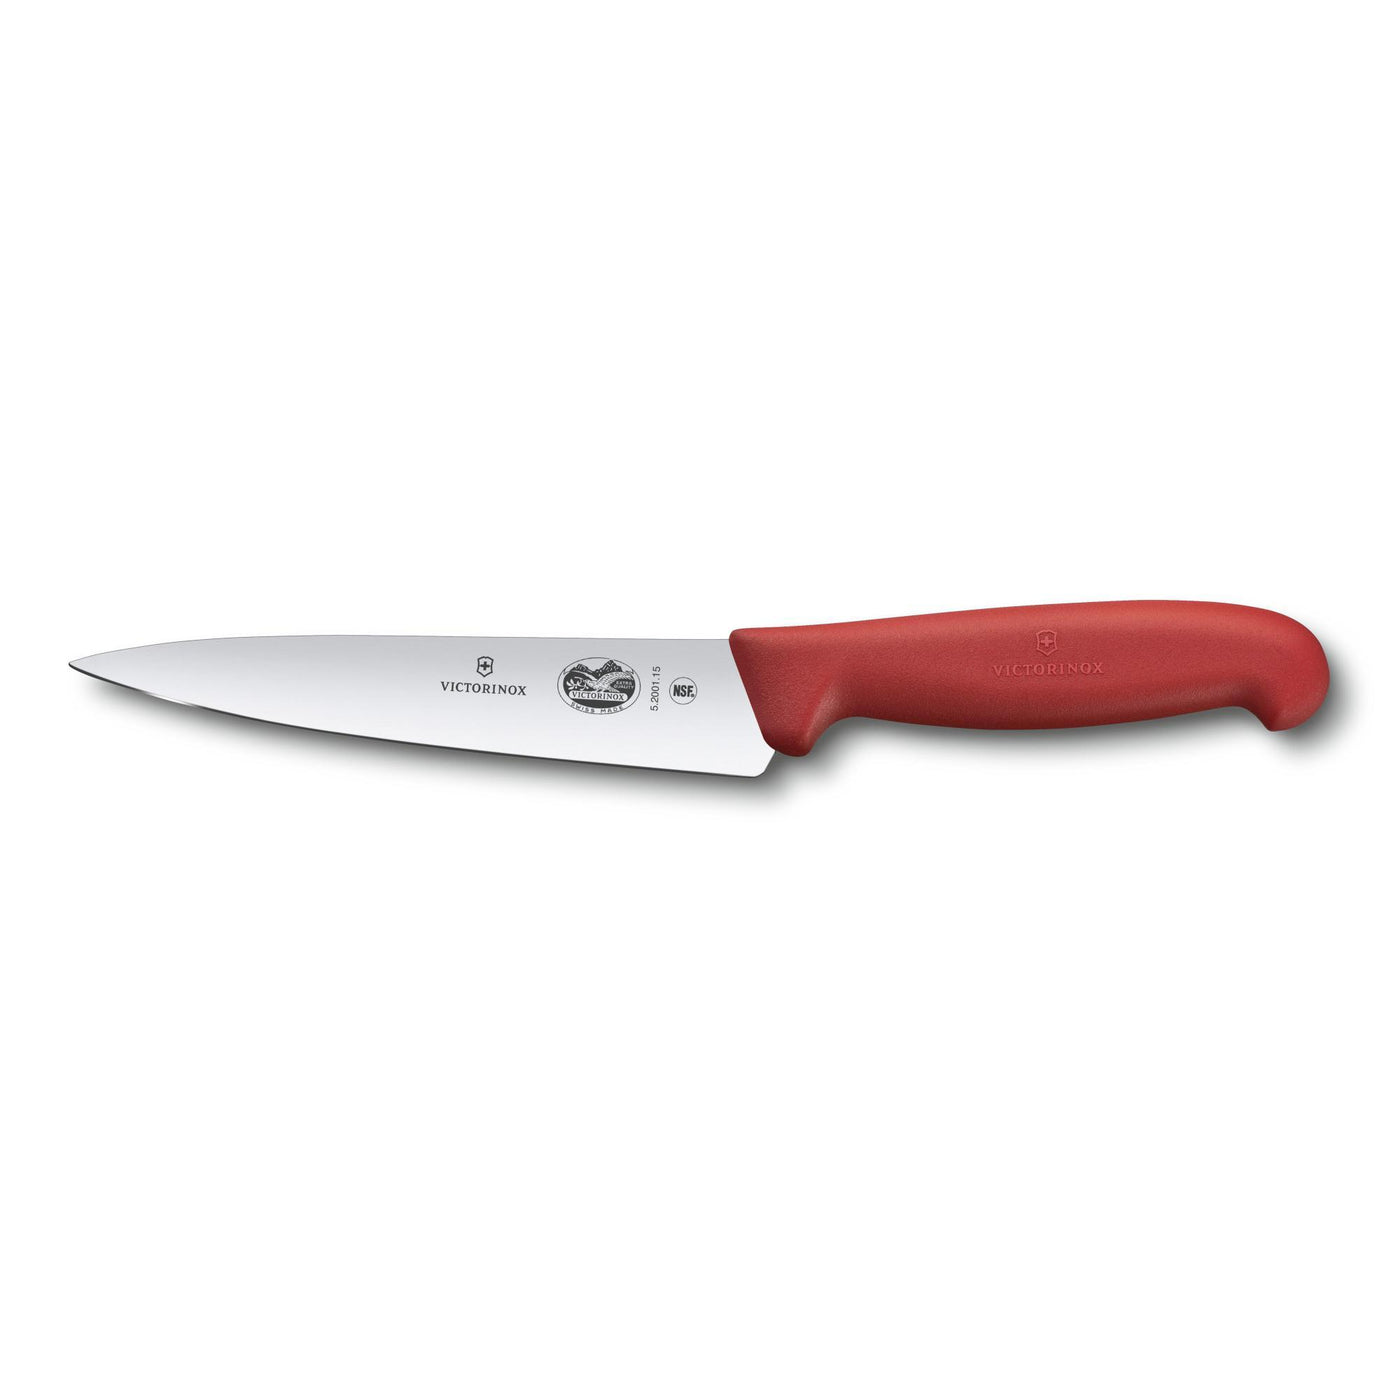 Victorinox - Fibrox Pro Chef Knife, Straight, 6", Red - Set With Style